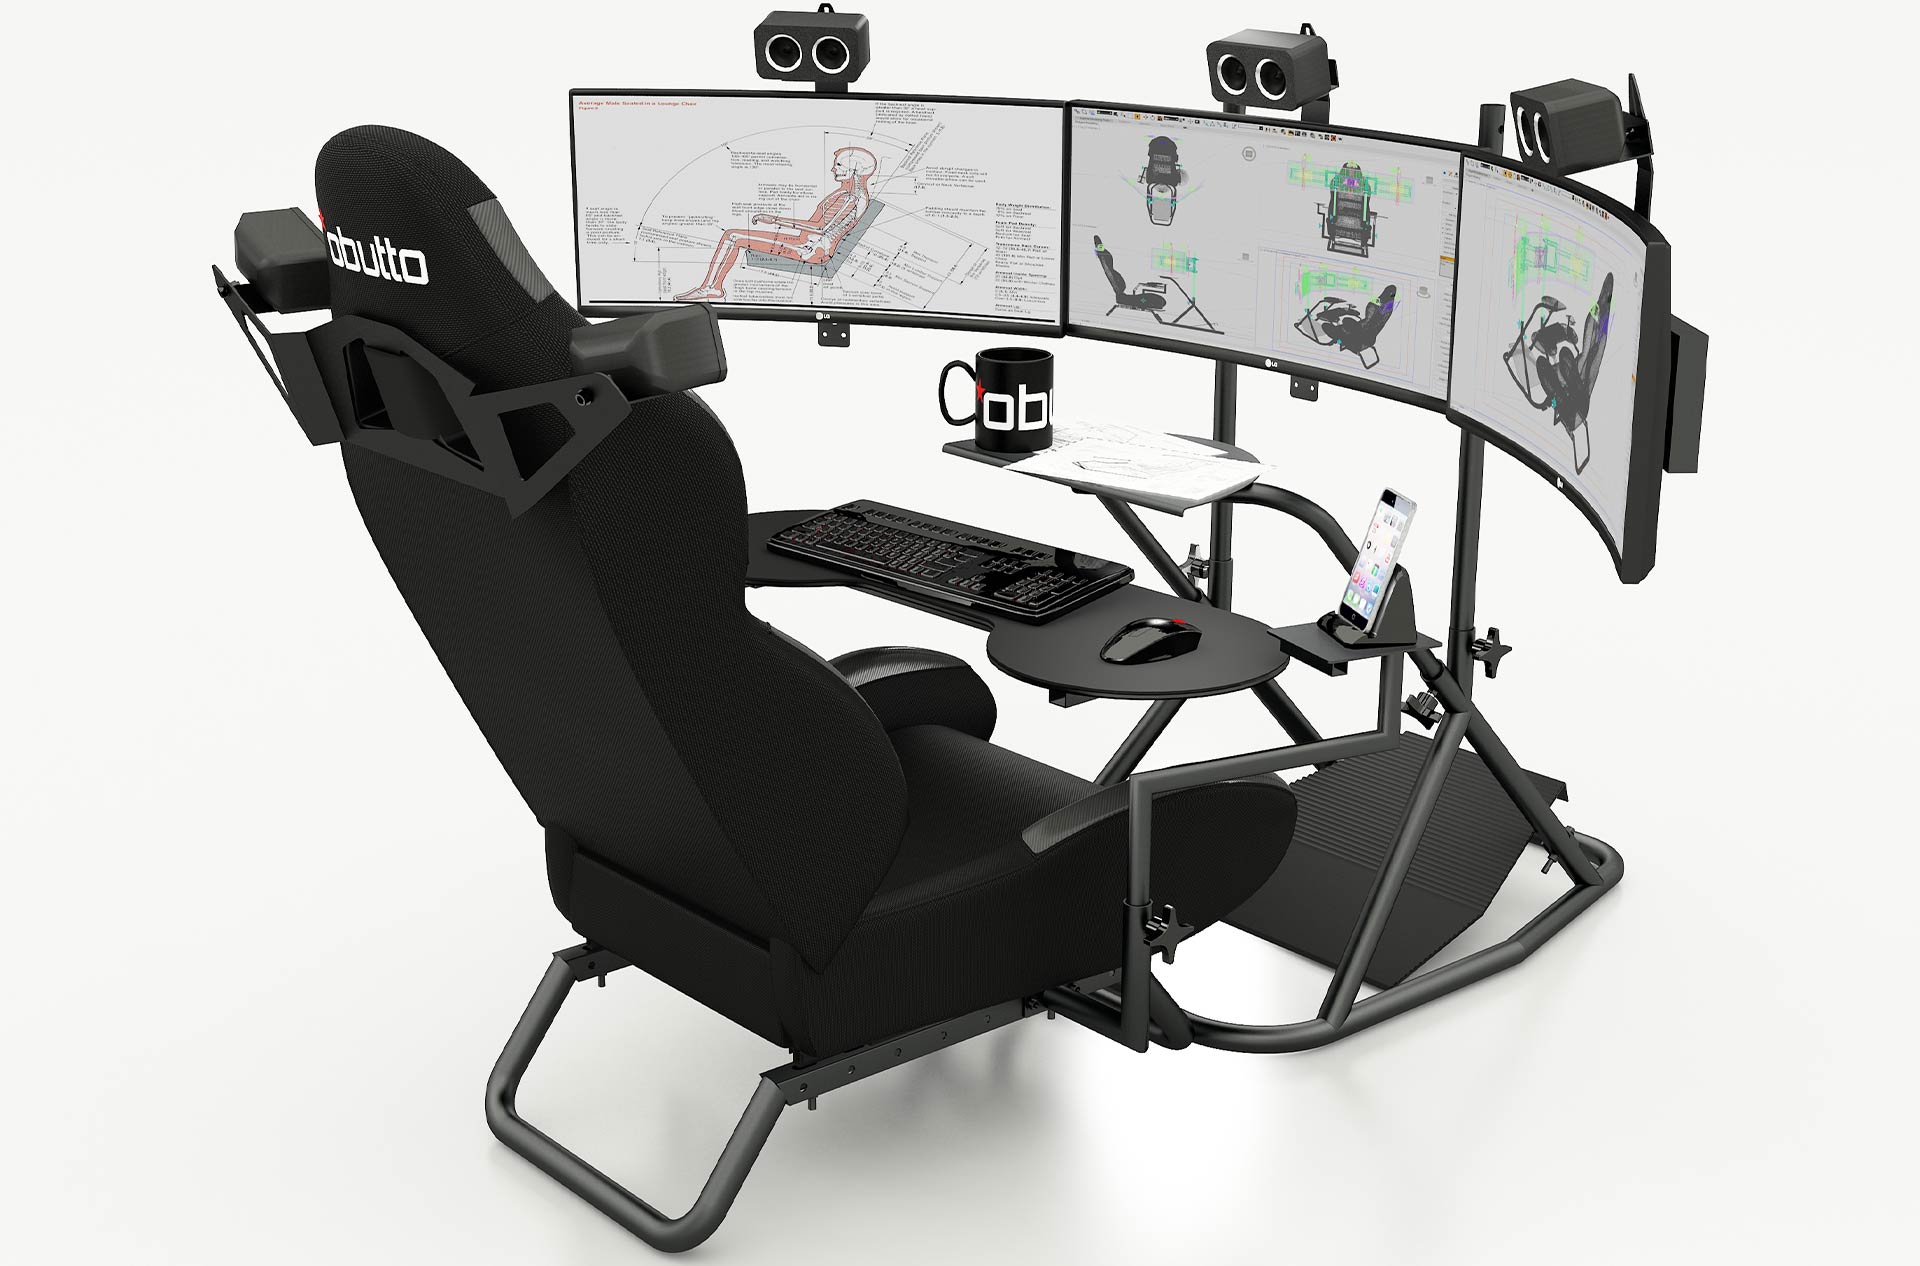 Image of an Obutto Ozone computer gaming chair